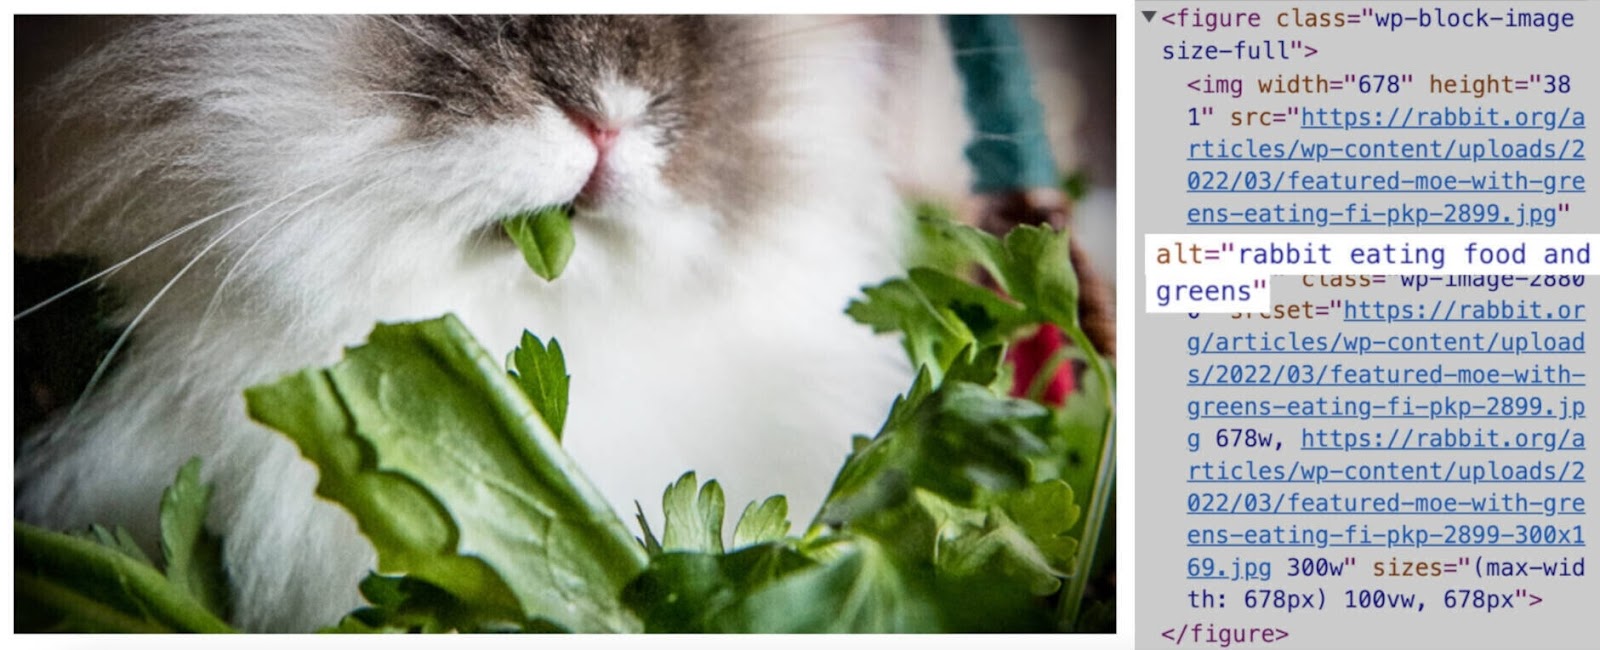 Rabbit image has alt text in the code "rabbit eating food and greens"